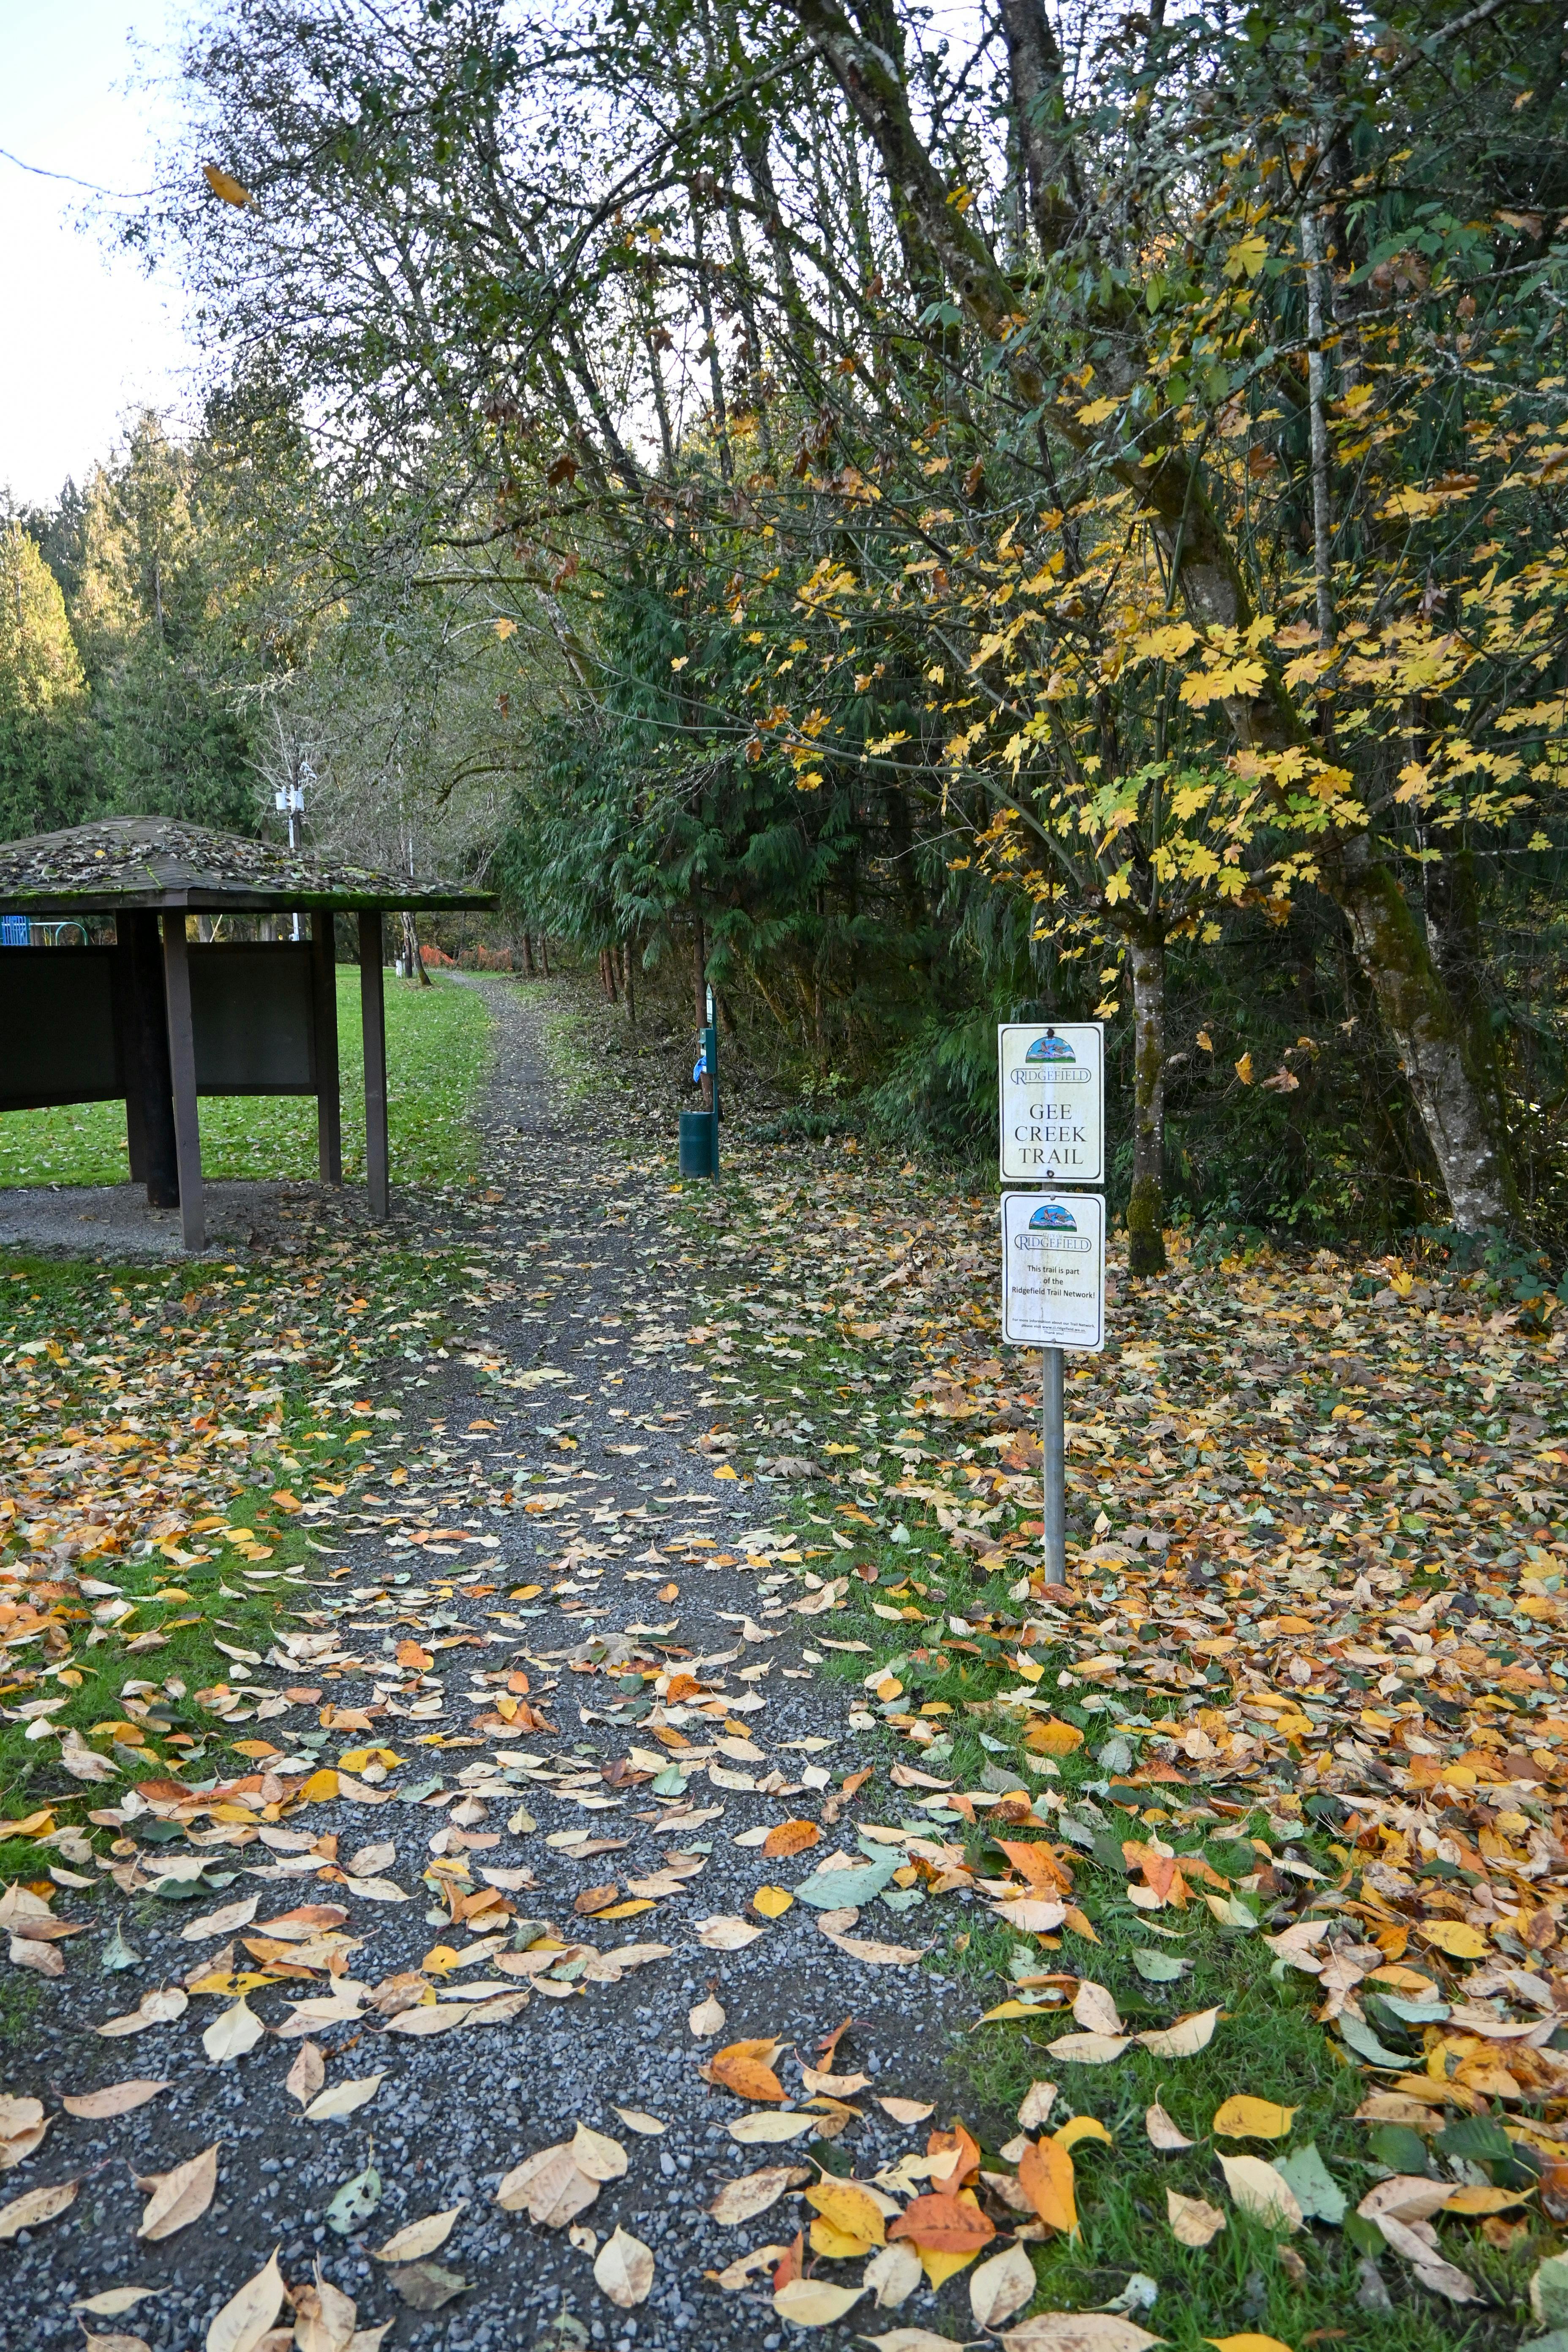 Gee Creek Trail access point and Park Signage